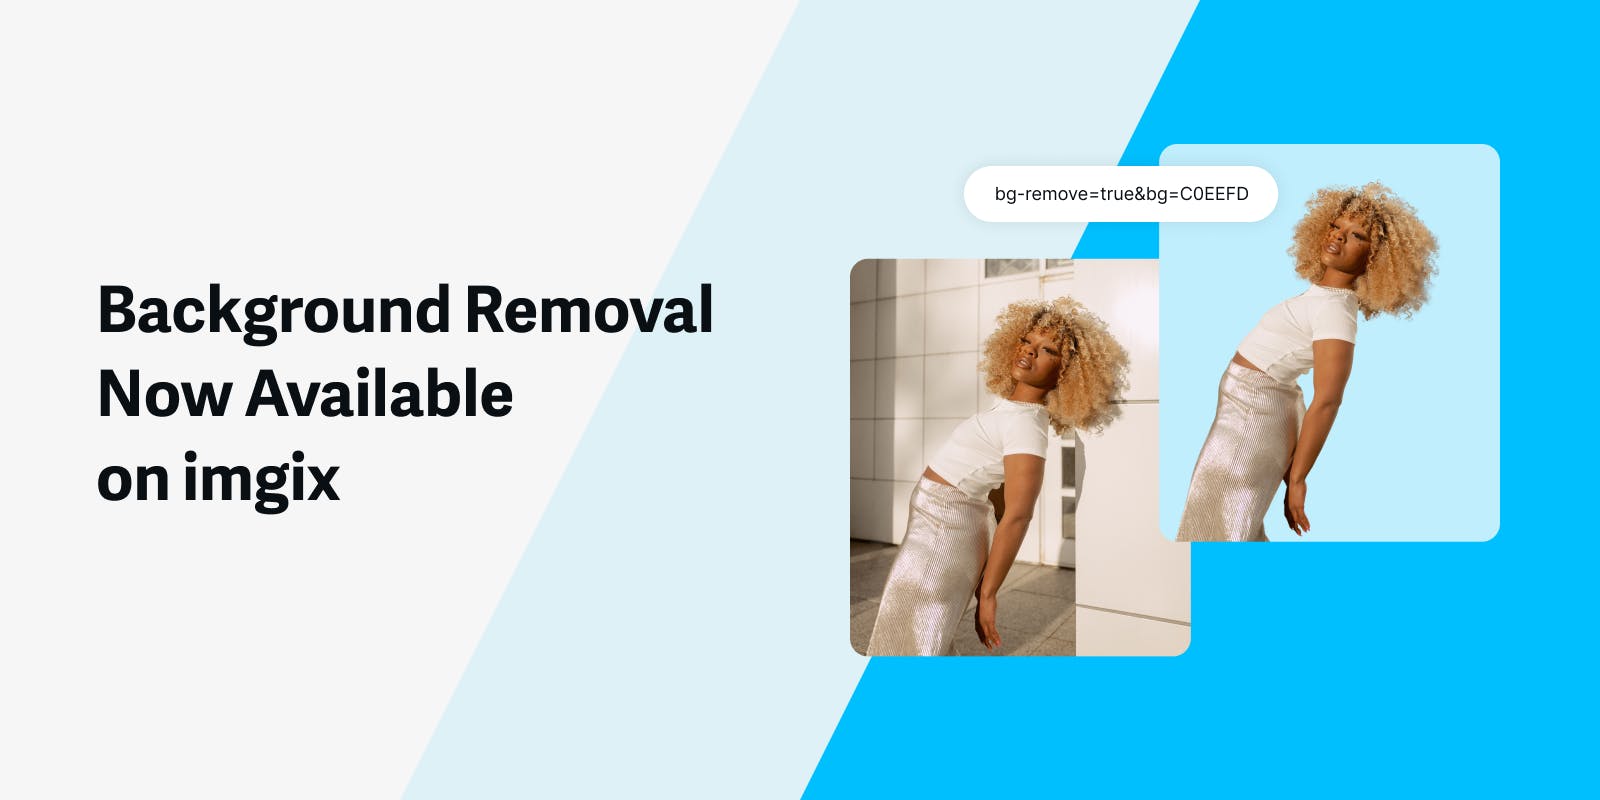 For the ultimate design versatility and precision, use imgix to automate image background removal and replacement at scale.